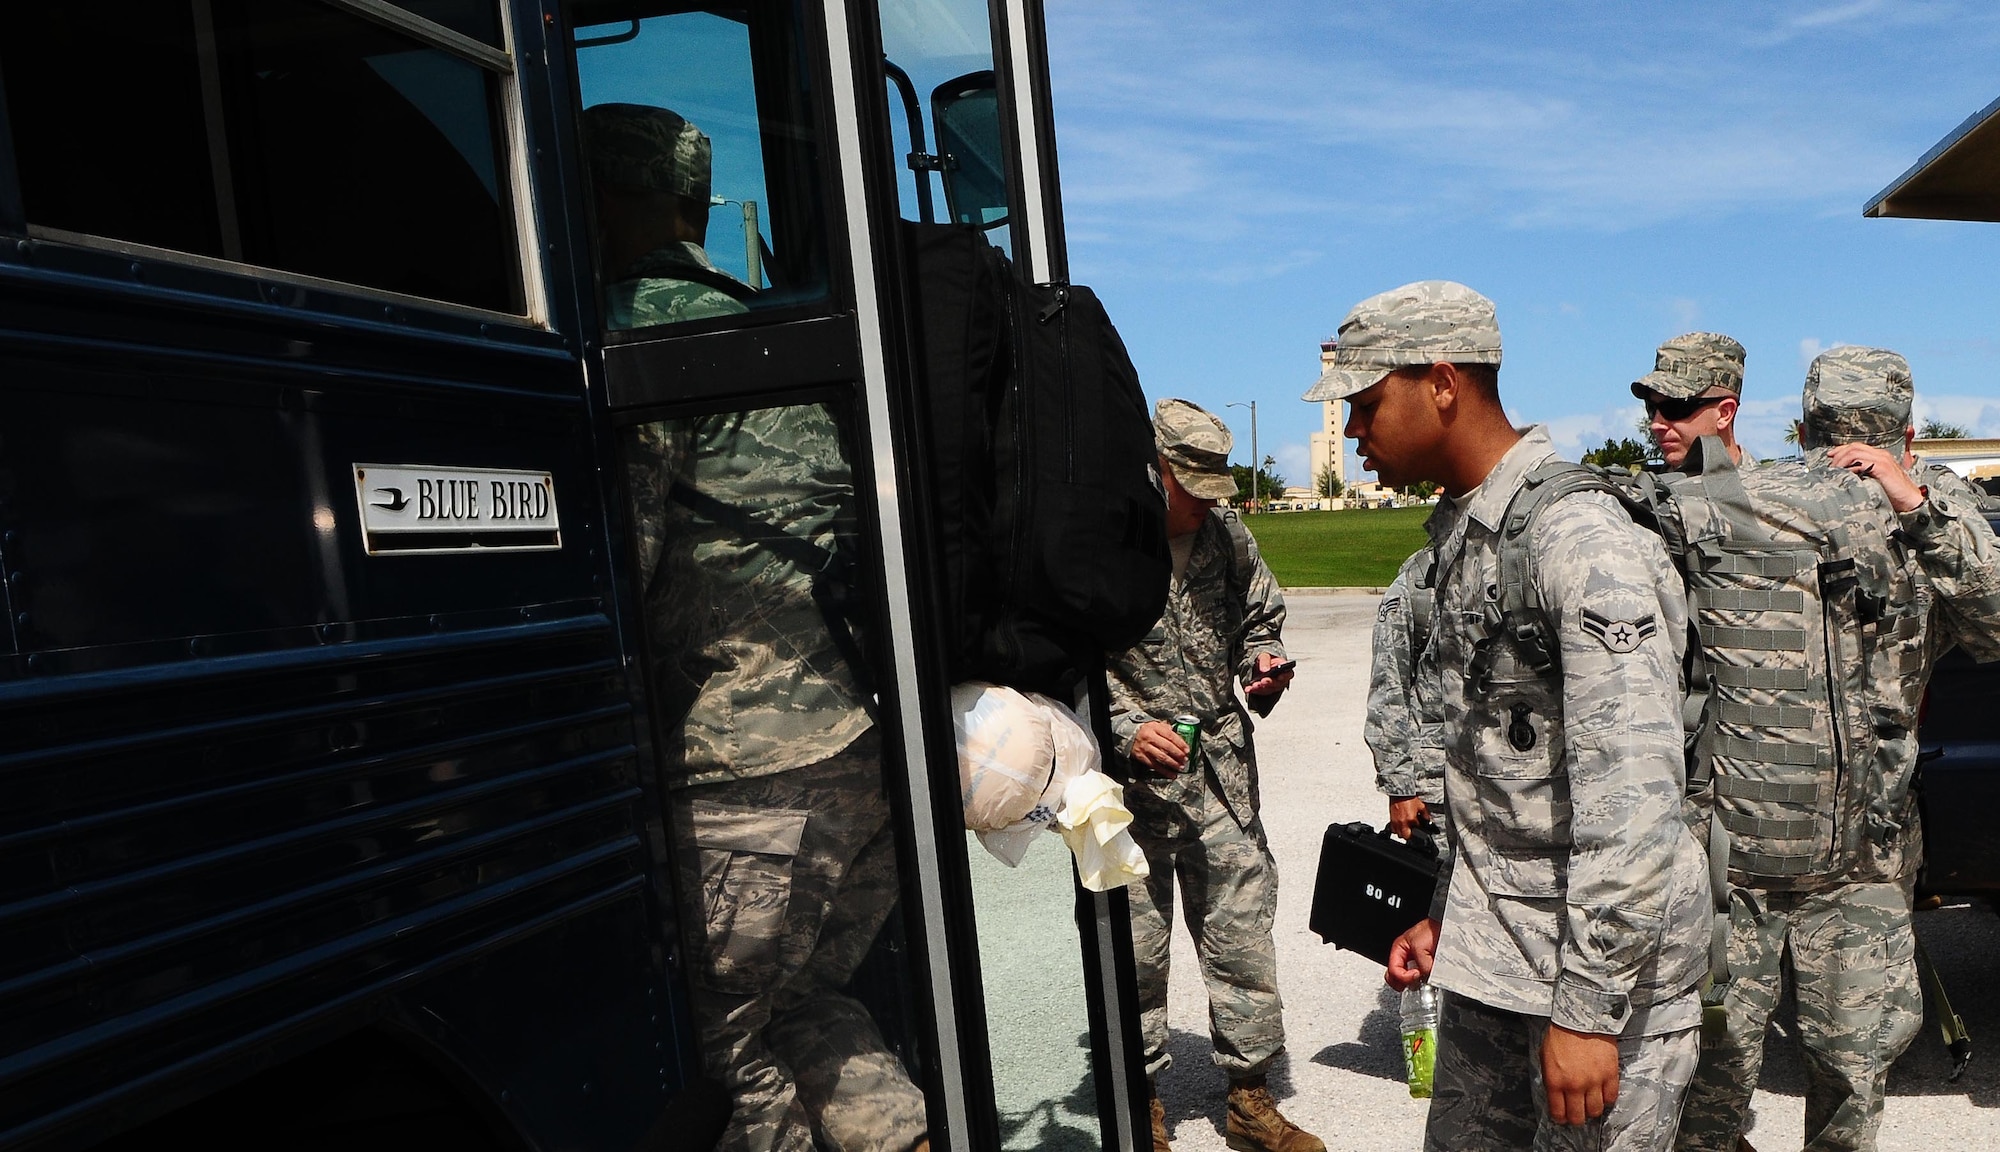 ANDERSEN AIR FORCE BASE, Guam-- Members of a Humanitarian Assistance Rapid Response Team (HARRT) board a bus in route to the mobility deployment processing center here Oct. 5 before departing to Padang, Indonesia, to provide disaster relief after a 7.6 magnitude earthquake struck the area Sep 30. The HARRT is made up of members from the 36th Contingency Response Group and the 36th Medial Group at Andersen AFB.  (U.S. Air Force photo by Senior Airman Nichelle Anderson/Released)
